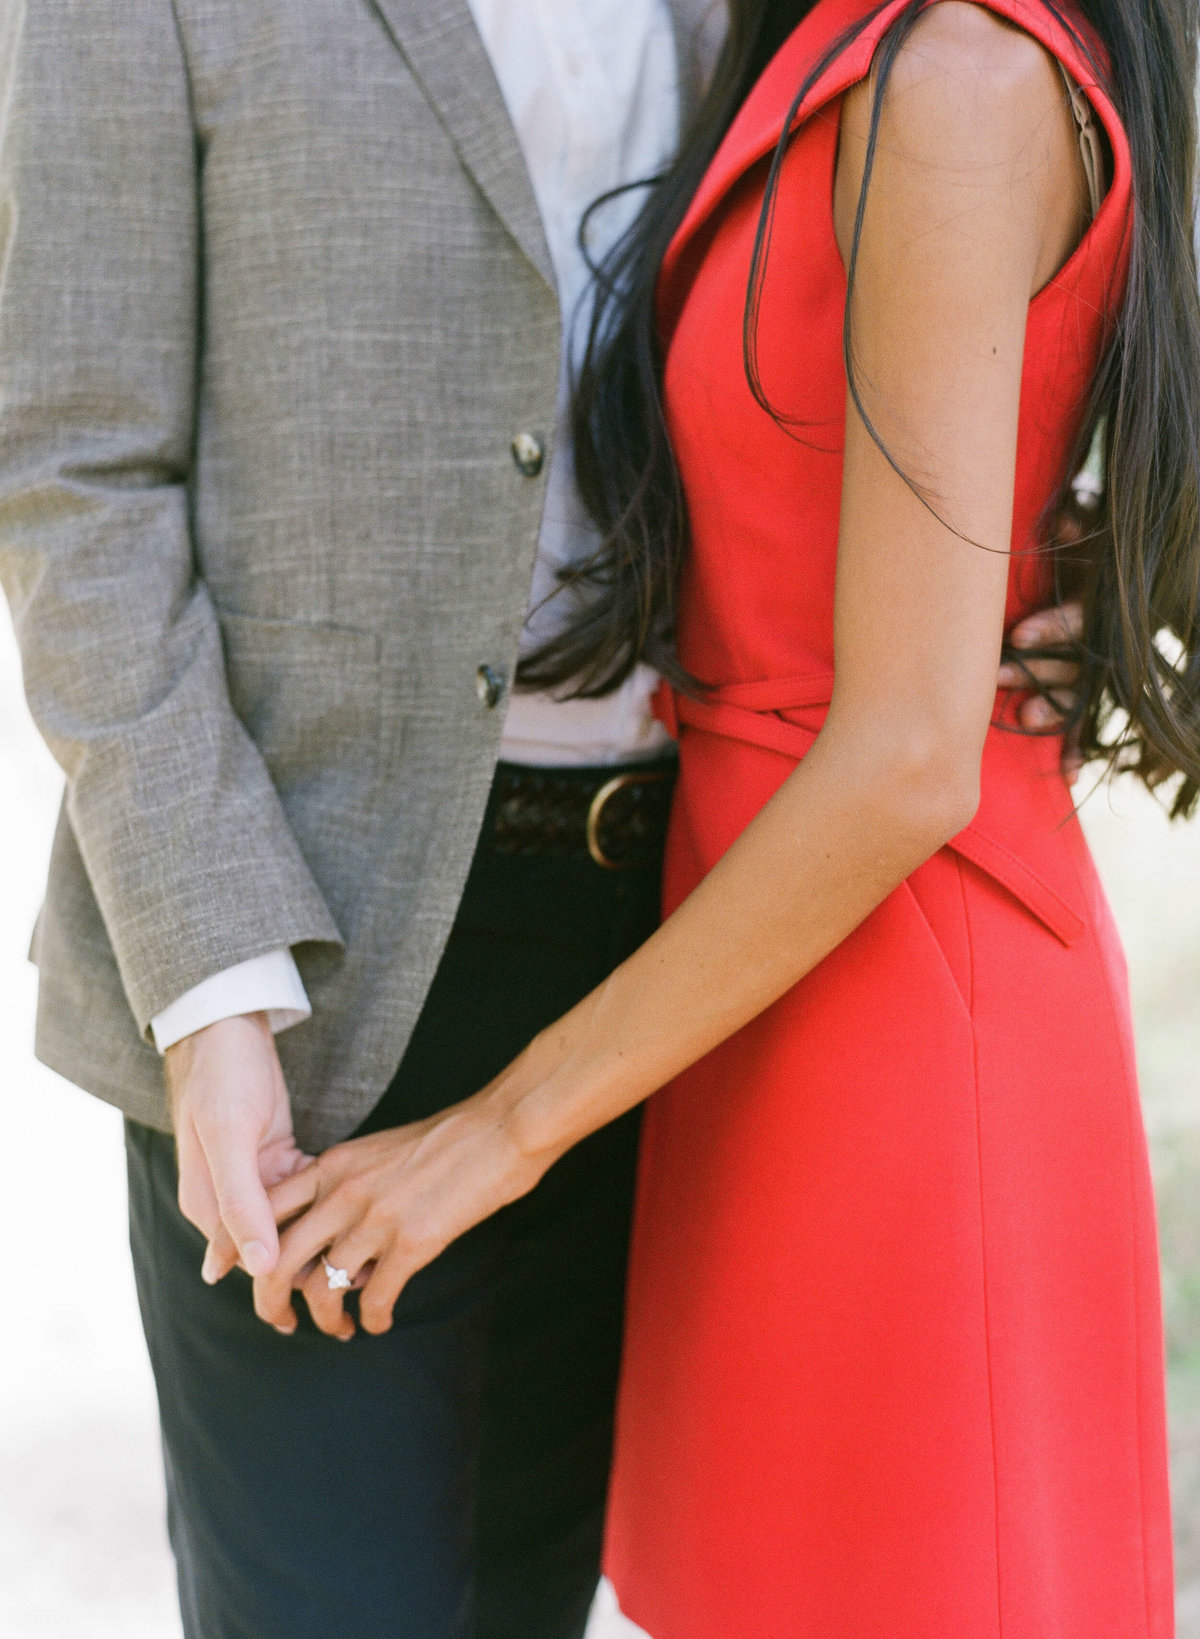 52-KTMerry-engagement-photography-holding-hands-red-dress